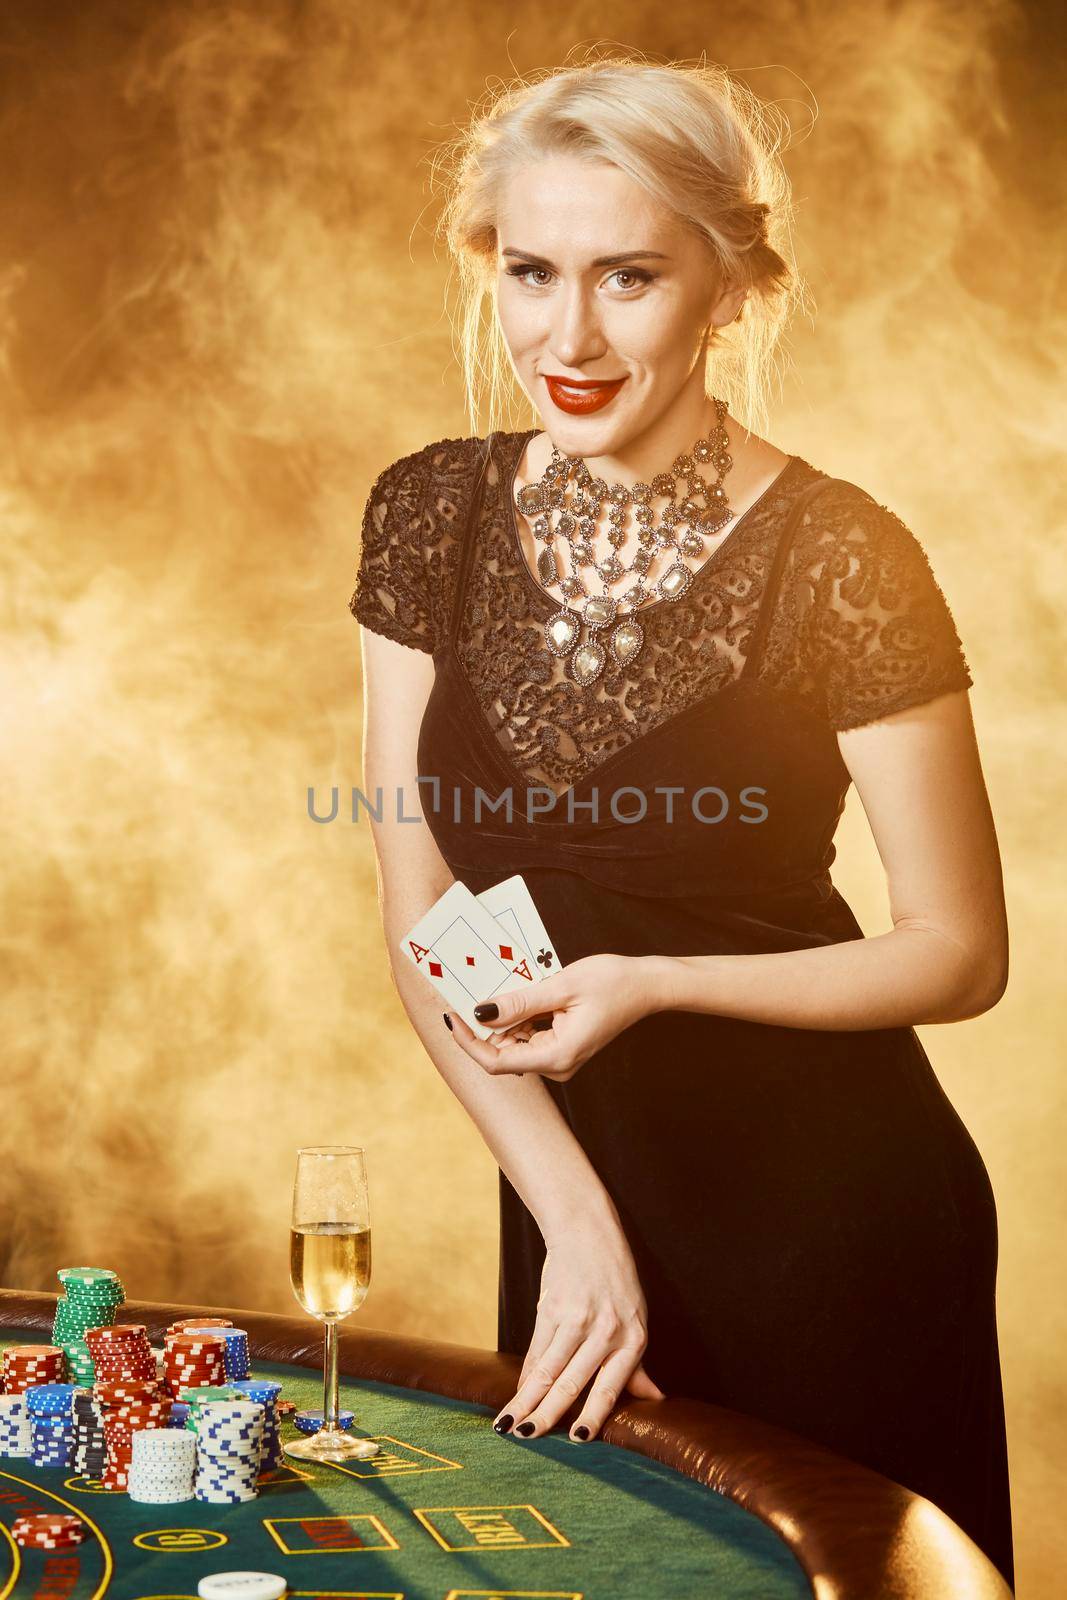 A woman in a black dress with cards in her hands is standing near the poker table. On the poker table are stacks of colored chips and a glass of champagne